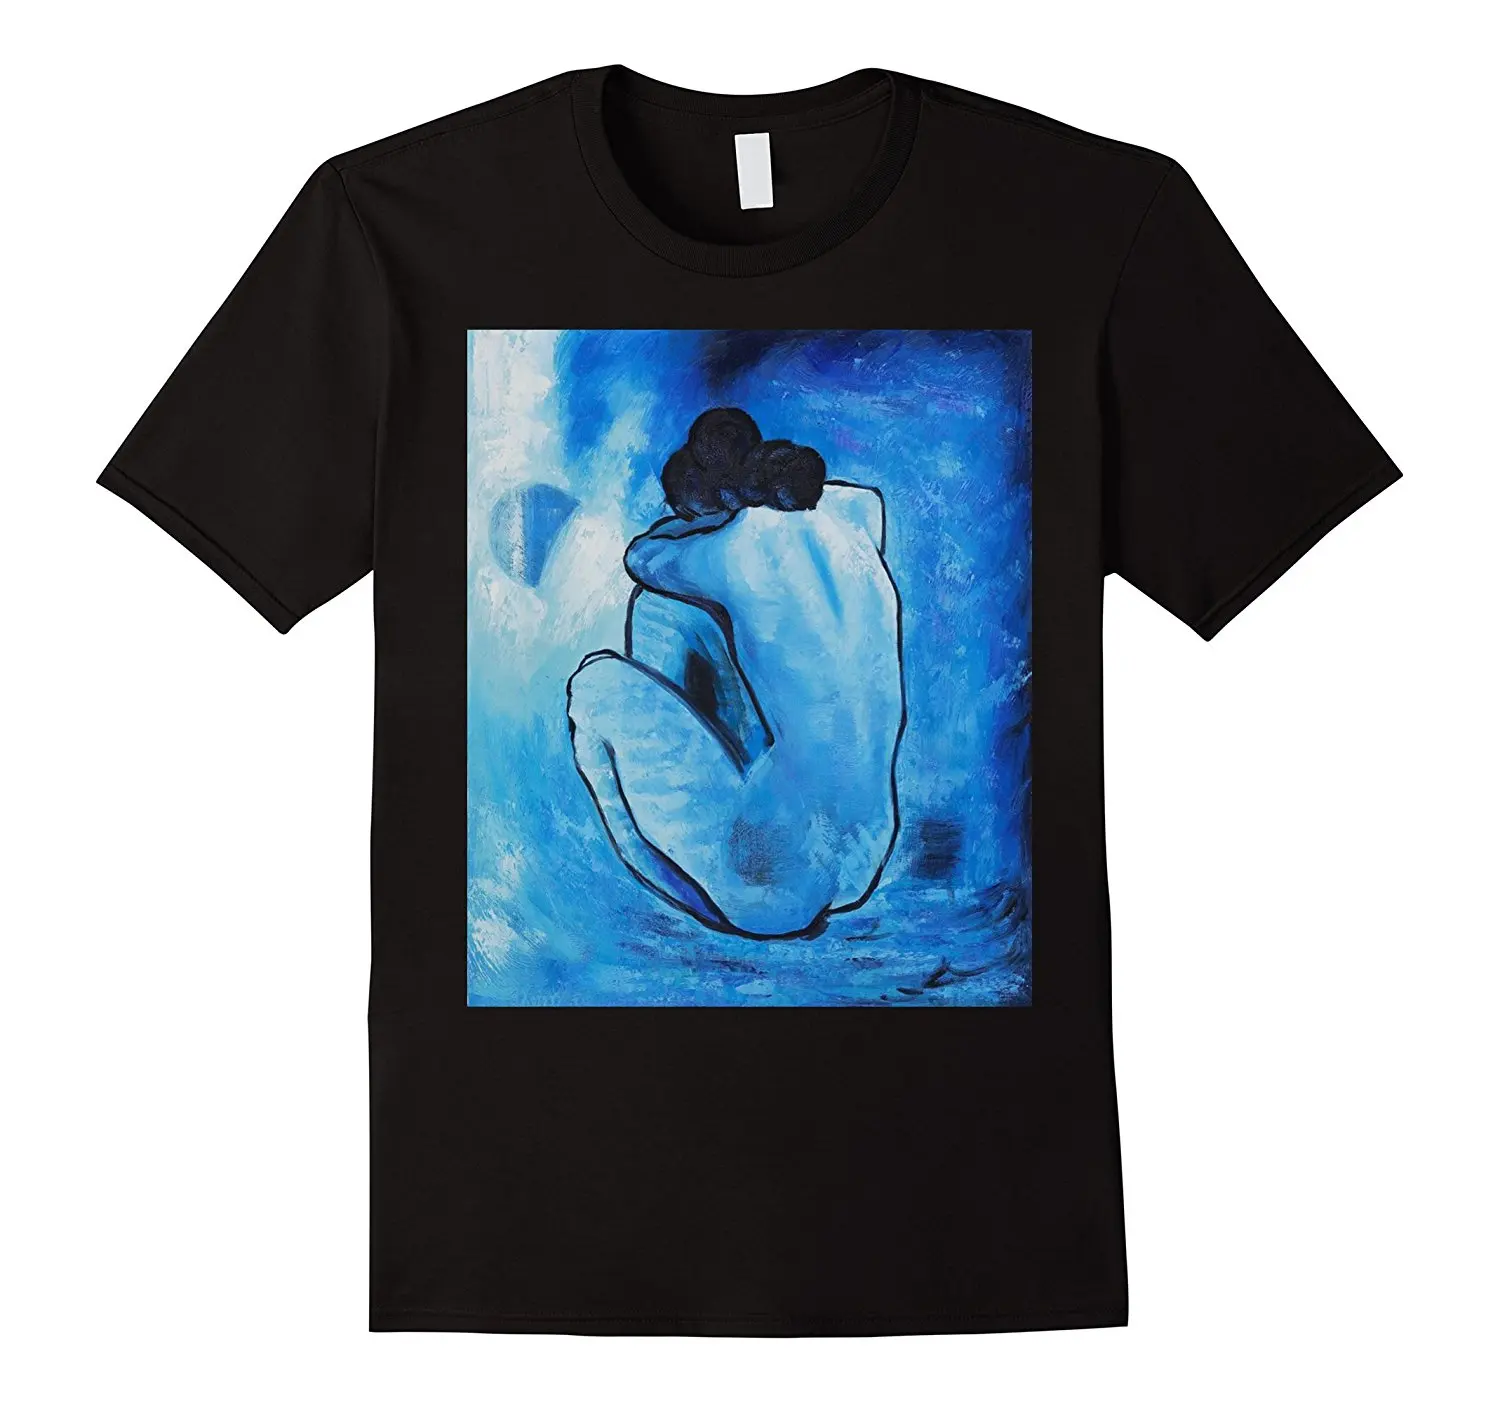 

Blue Nude, 1902 By Pablo Picasso Famous Painting Shirt Short Sleeve Cotton T Shirts Man Clothing O-Neck Comfortable Top Tee